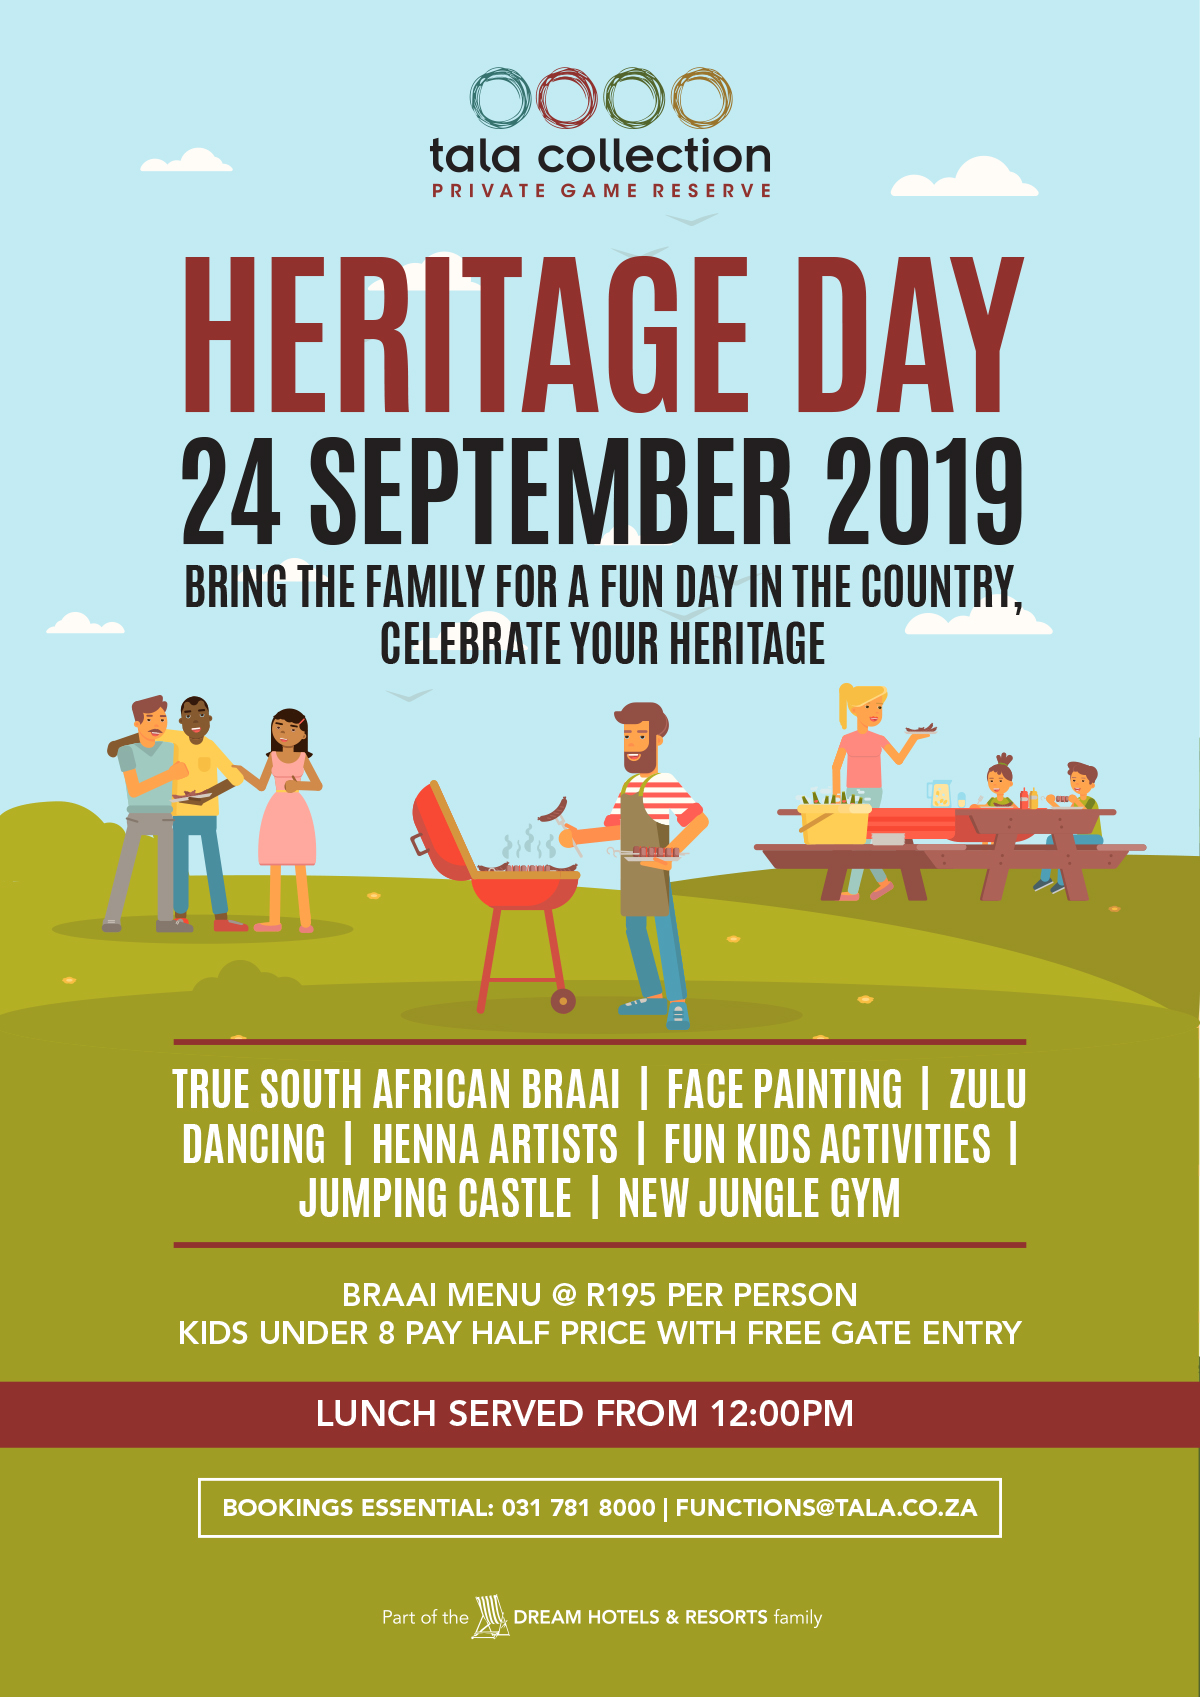 Tala Collection Game Reserve heritage day 24 Sept 2019